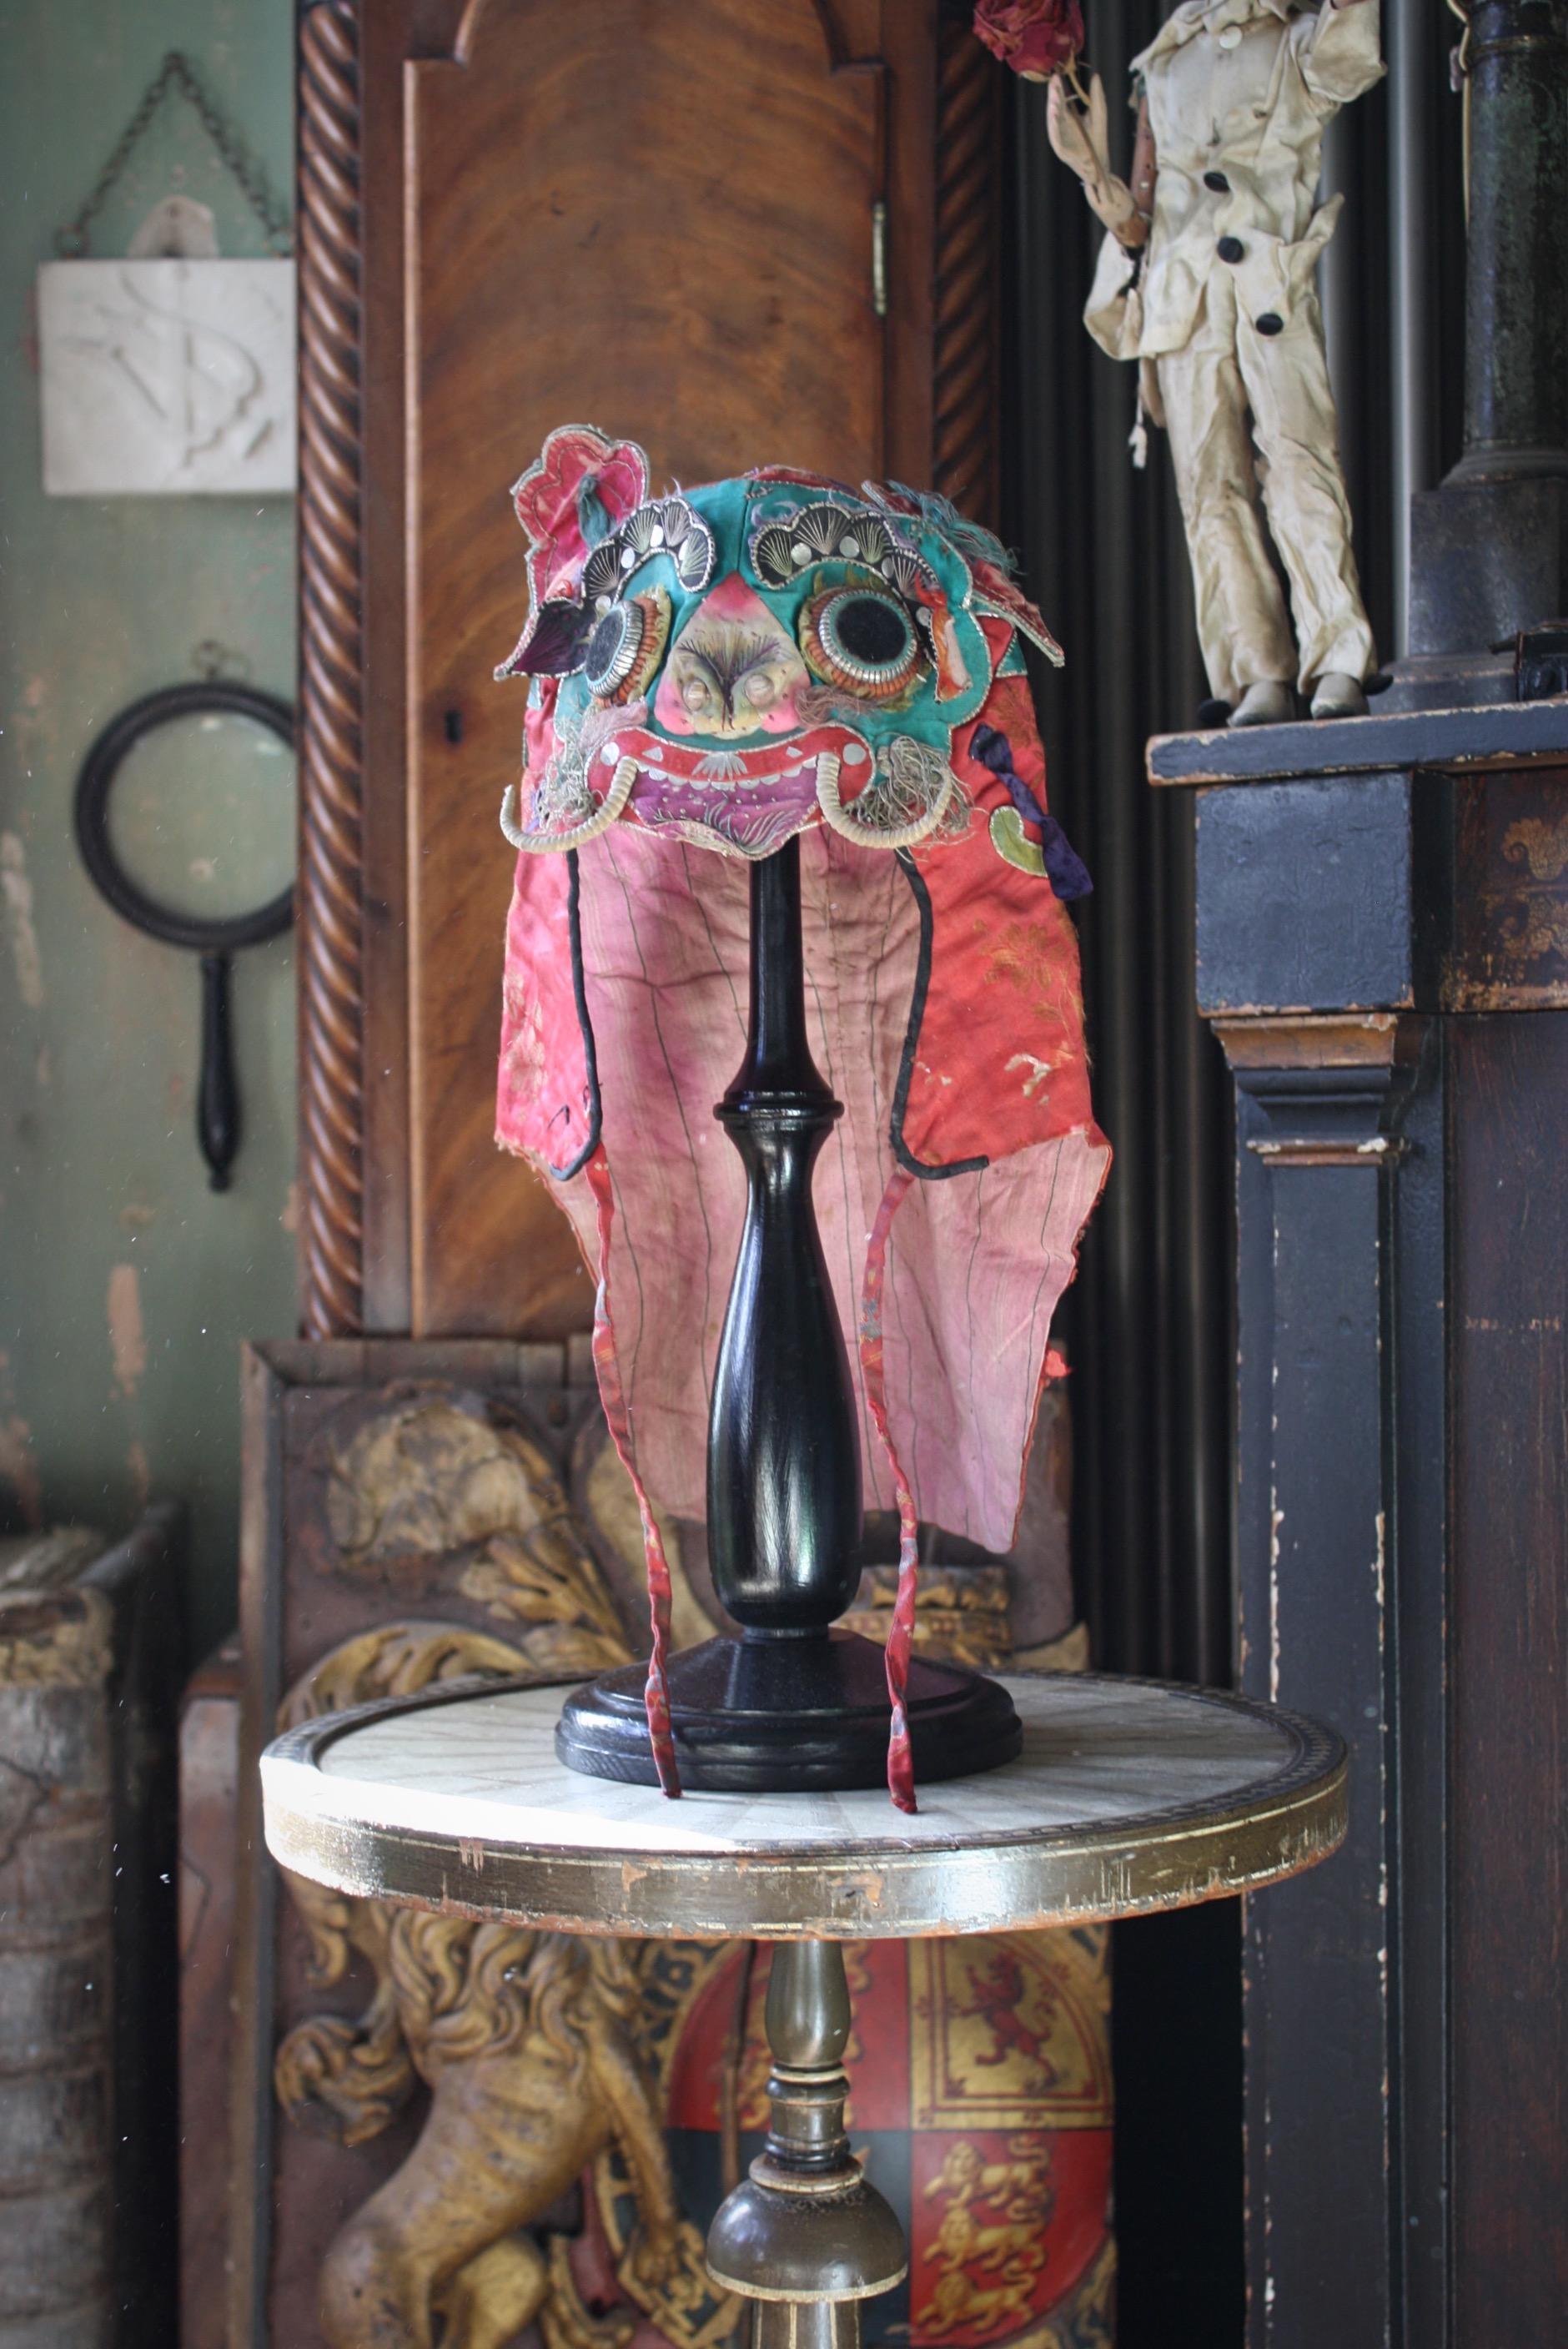 A Chinese silk hat from the late Qing period, displayed on a purpose made antique style ebonised wig stand.

These head dressers traditionally worn by children and often displayed mythical creatures, formed from embroidered features with a playful